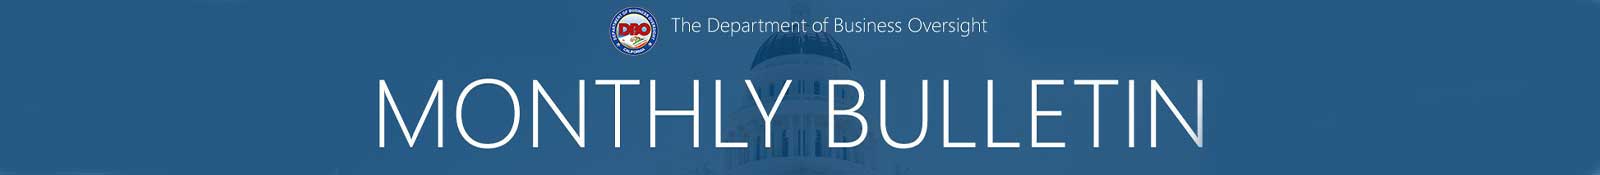 Department of Business Oversight - Monthly Bulletin